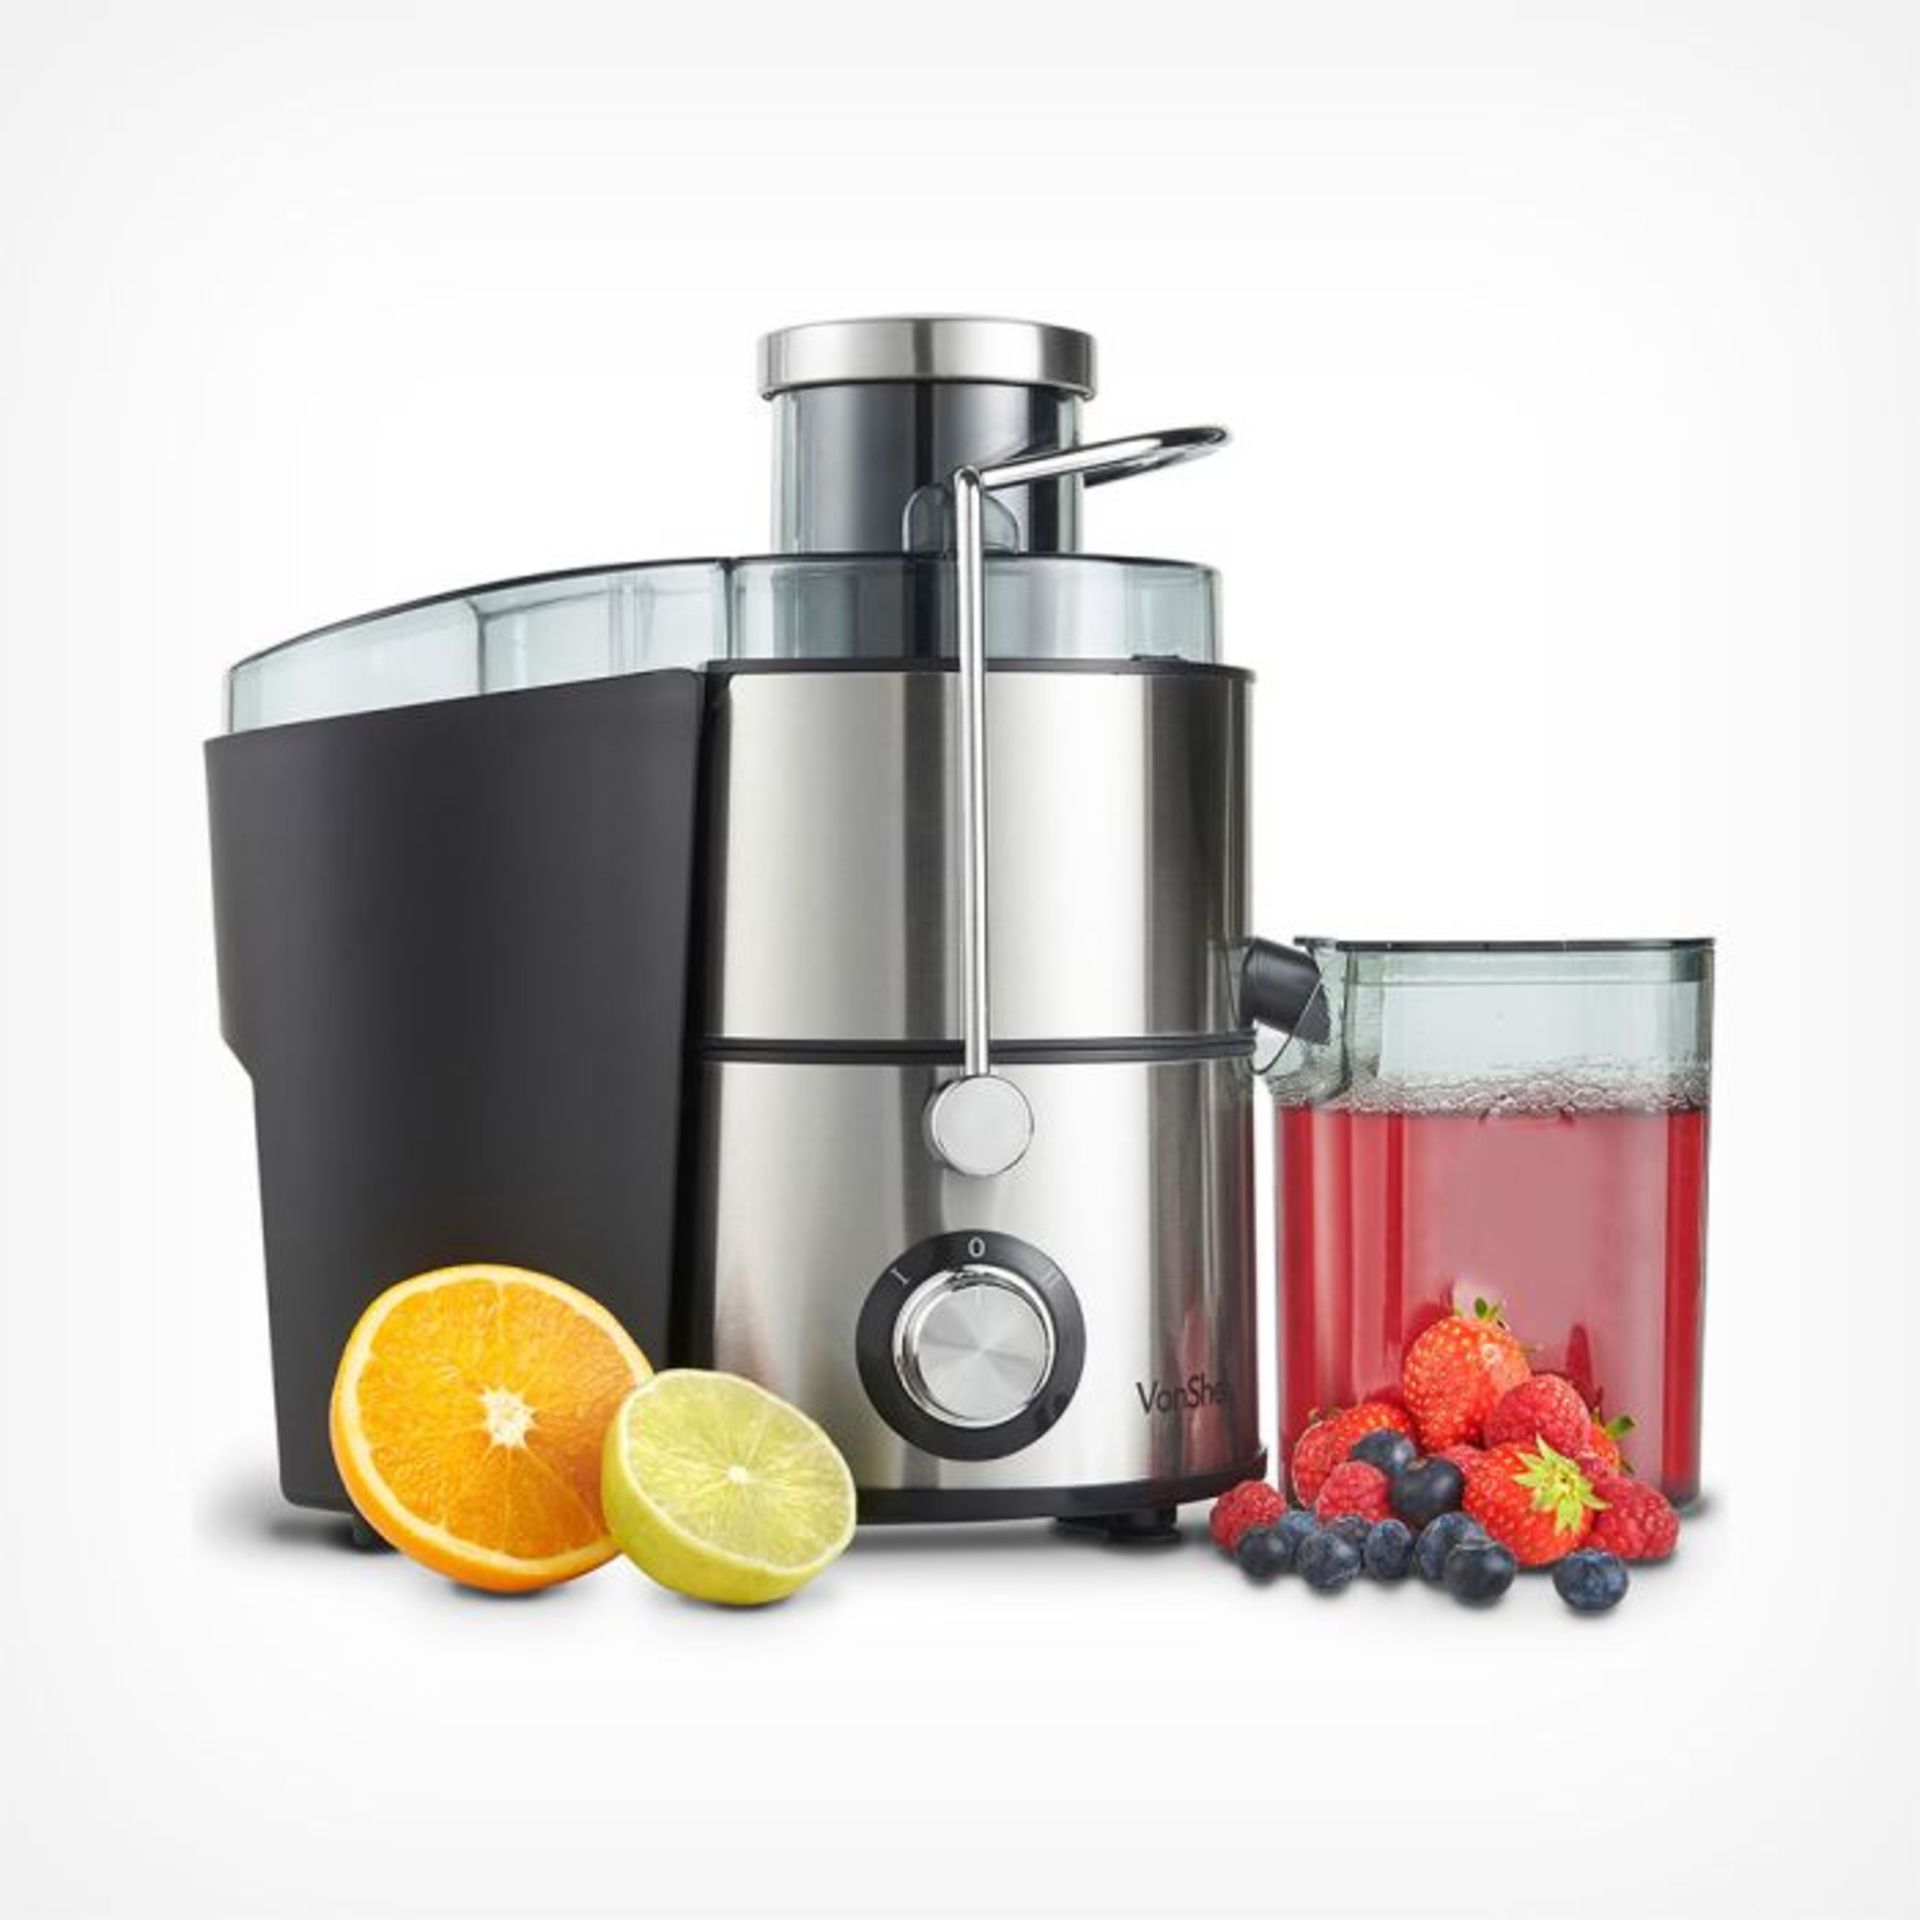 400W Stainless Steel Juicer. If you love tasty fresh juice, but don’t want the added preservatives